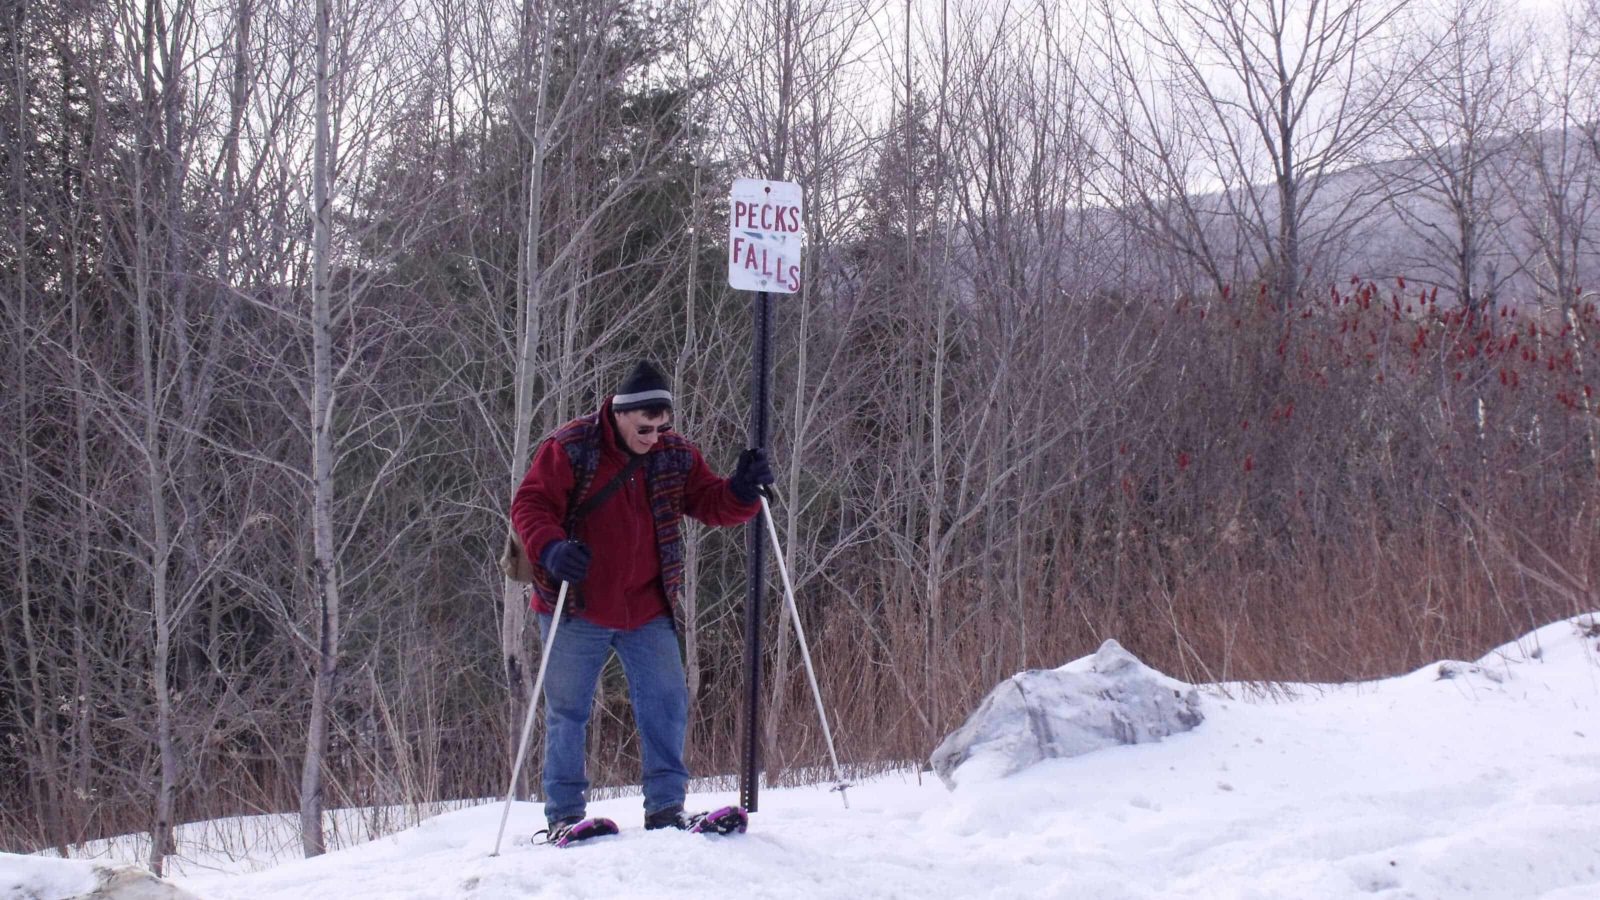 Tony Costello of Pittsfield returns from a snowshoe adventure to Pecks Falls on Mount Greylock.